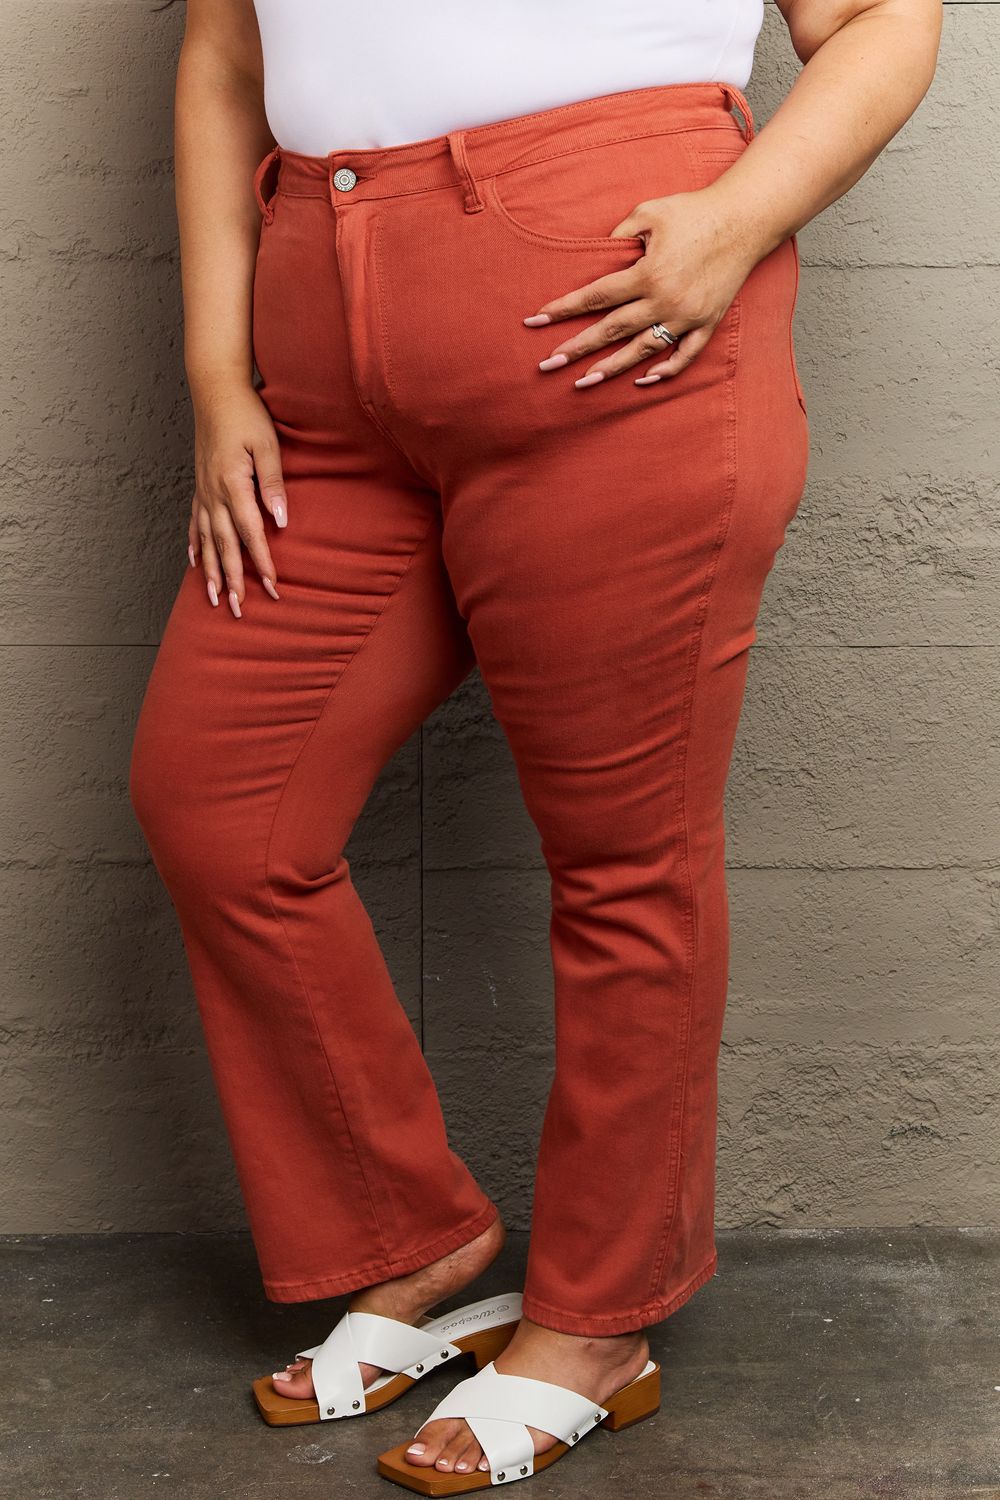 Judy Blue Olivia Terracotta Jeans - Cheeky Chic Boutique